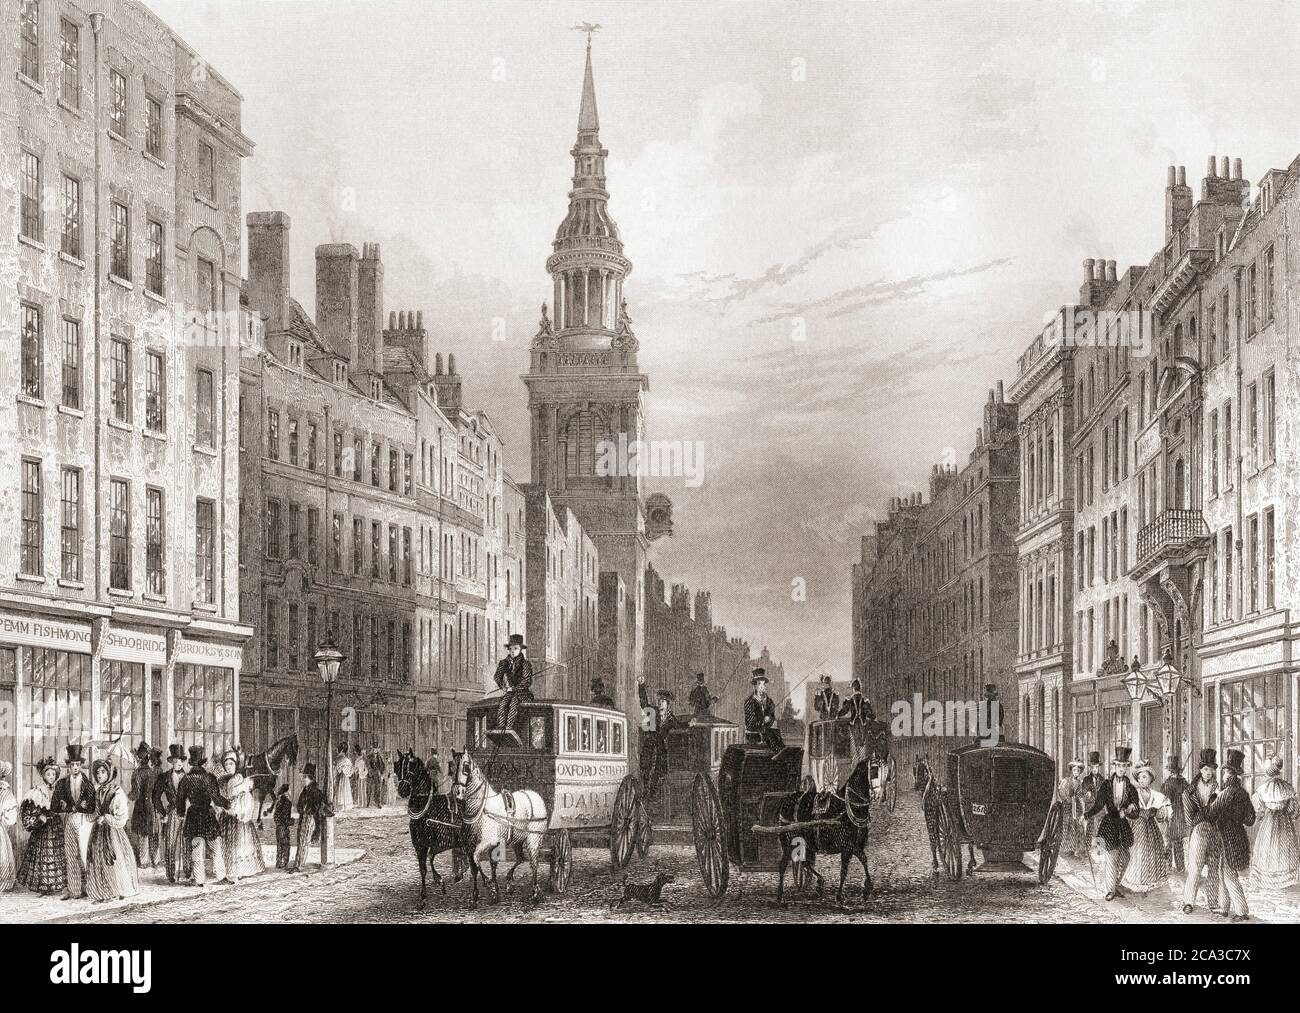 Cheapside, London, England, 19th century. From The History of London: Illustrated by Views in London and Westminster, published c. 1838. Stock Photo